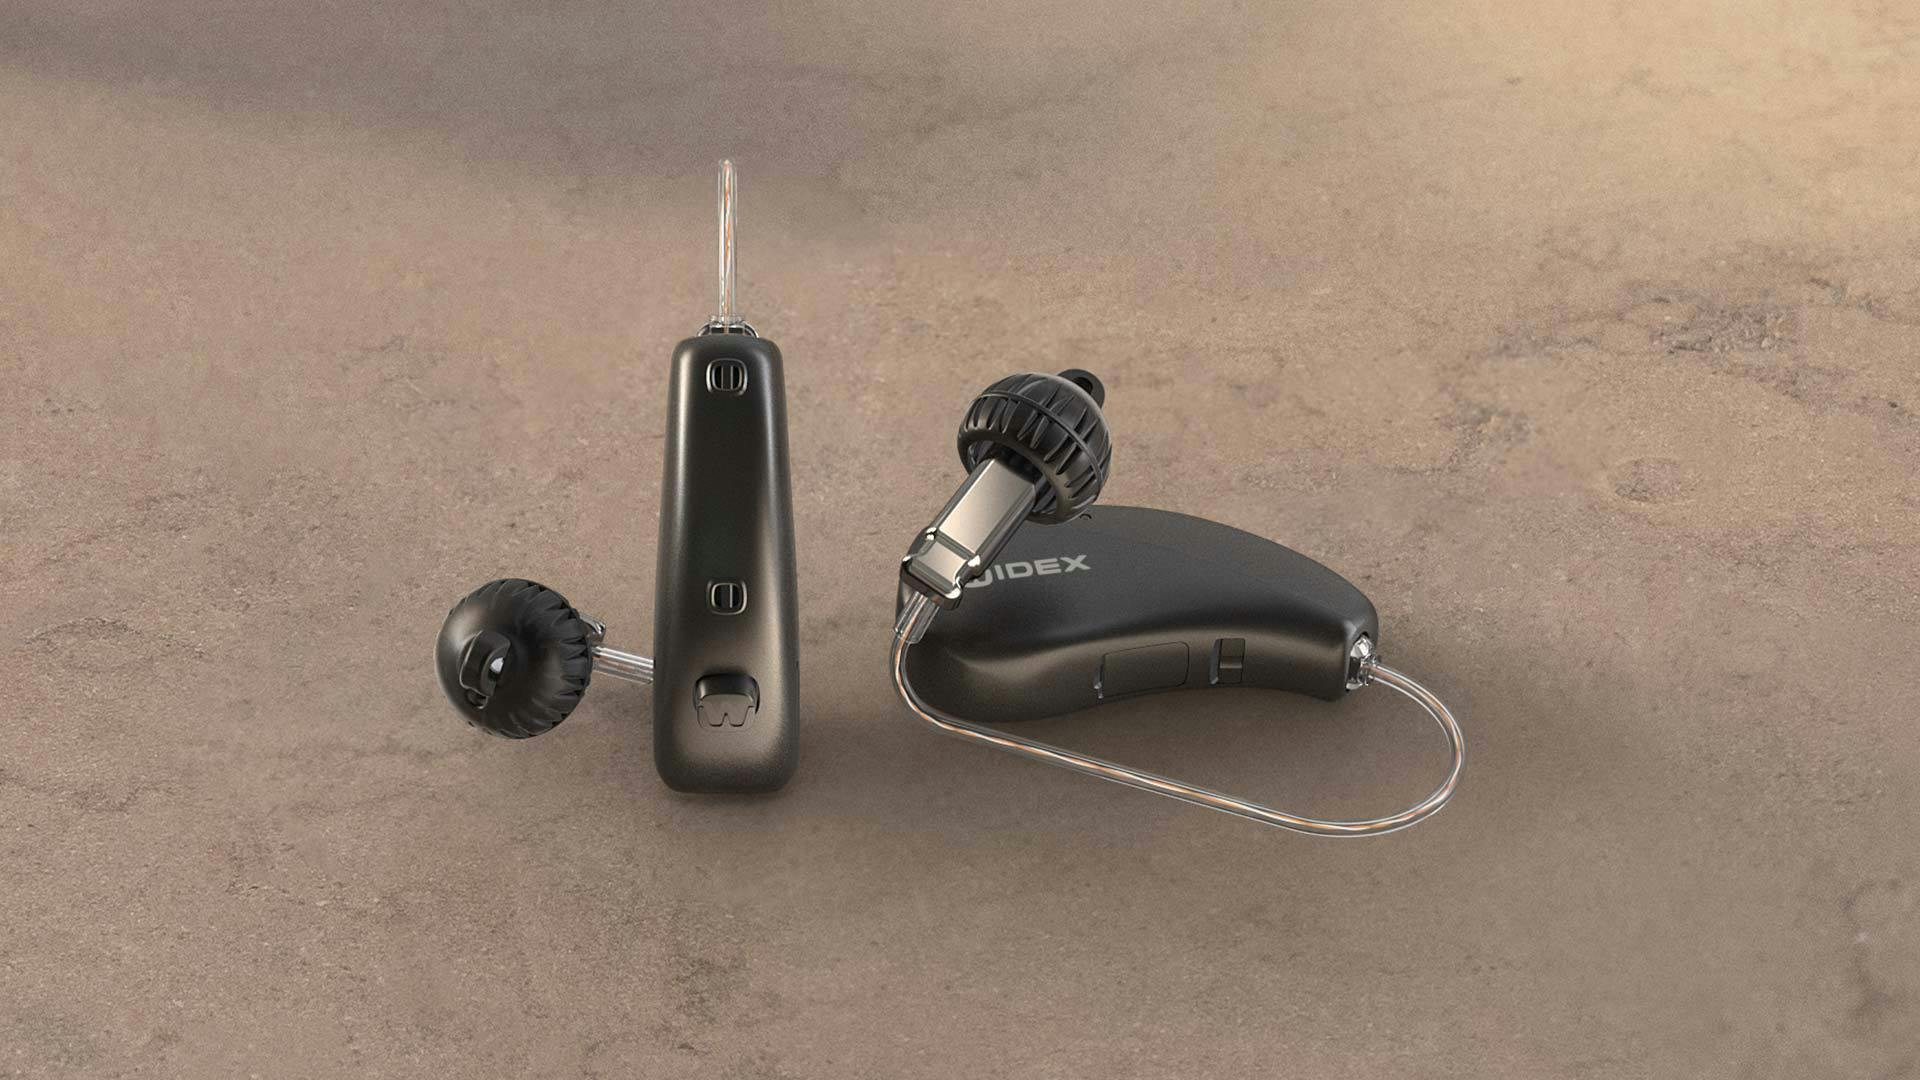 Widex hearing aids on a counter top